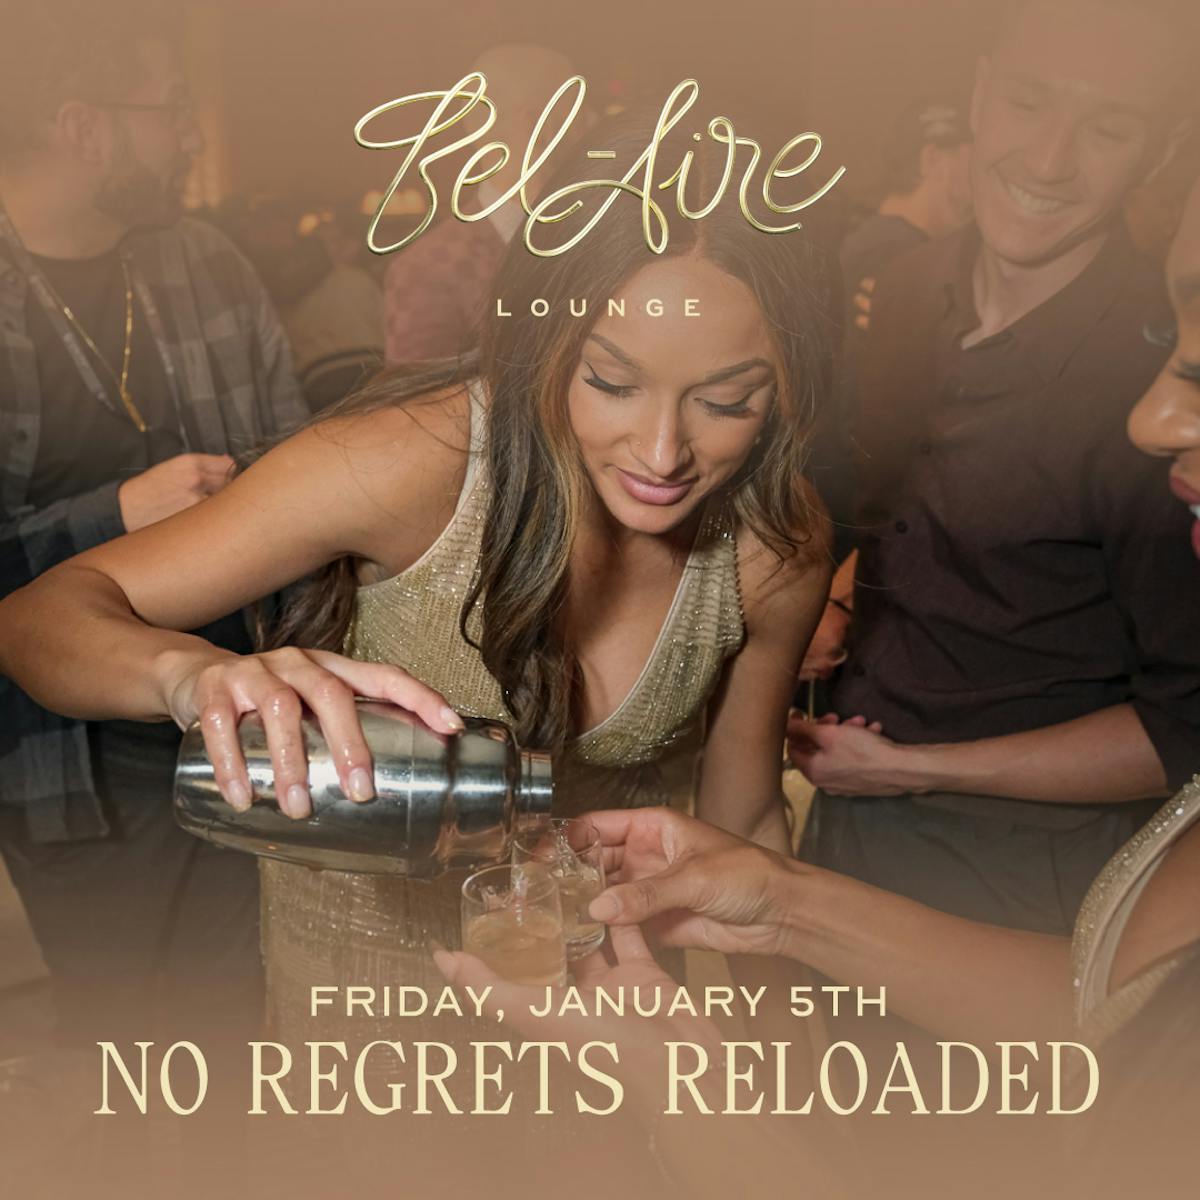 No Regrets Reloaded at The B-Side at Bel-Aire Lounge a Las Vegas Lounge